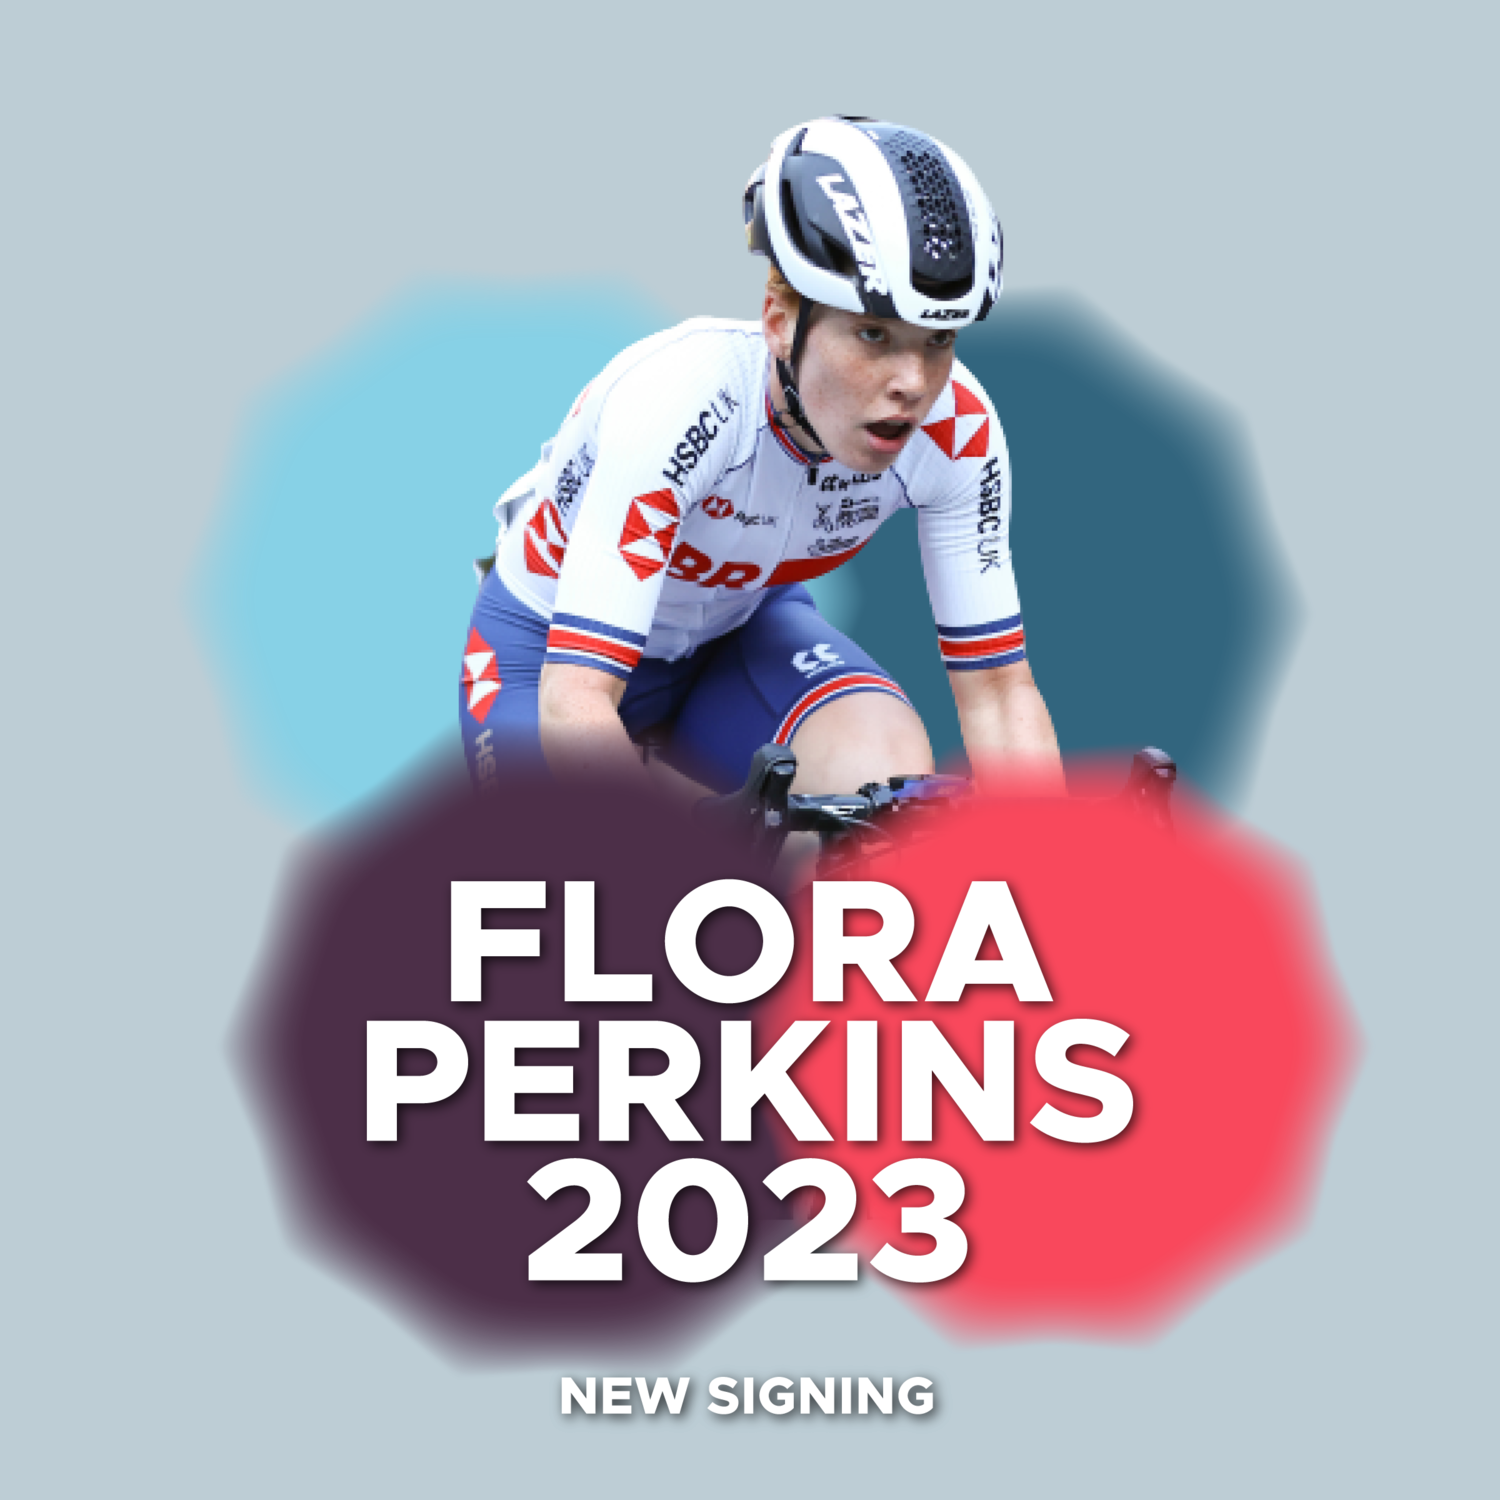 Perkins signs with Drops-Le Col